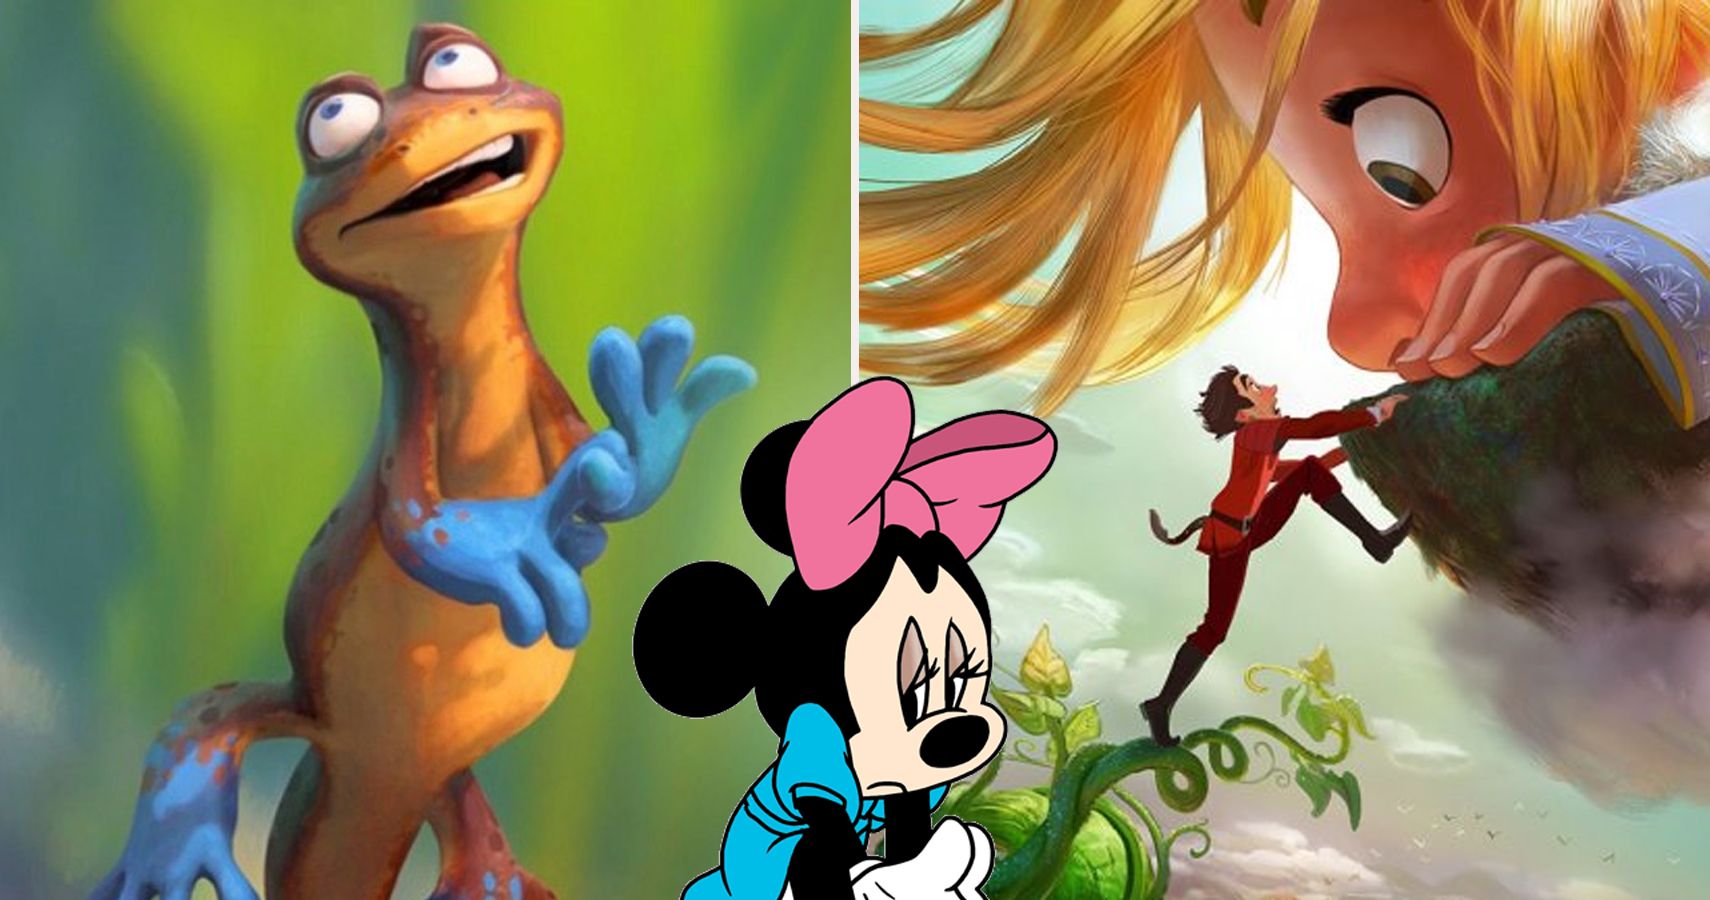 15 Canceled Disney Movies That Never Saw The Light Of Day